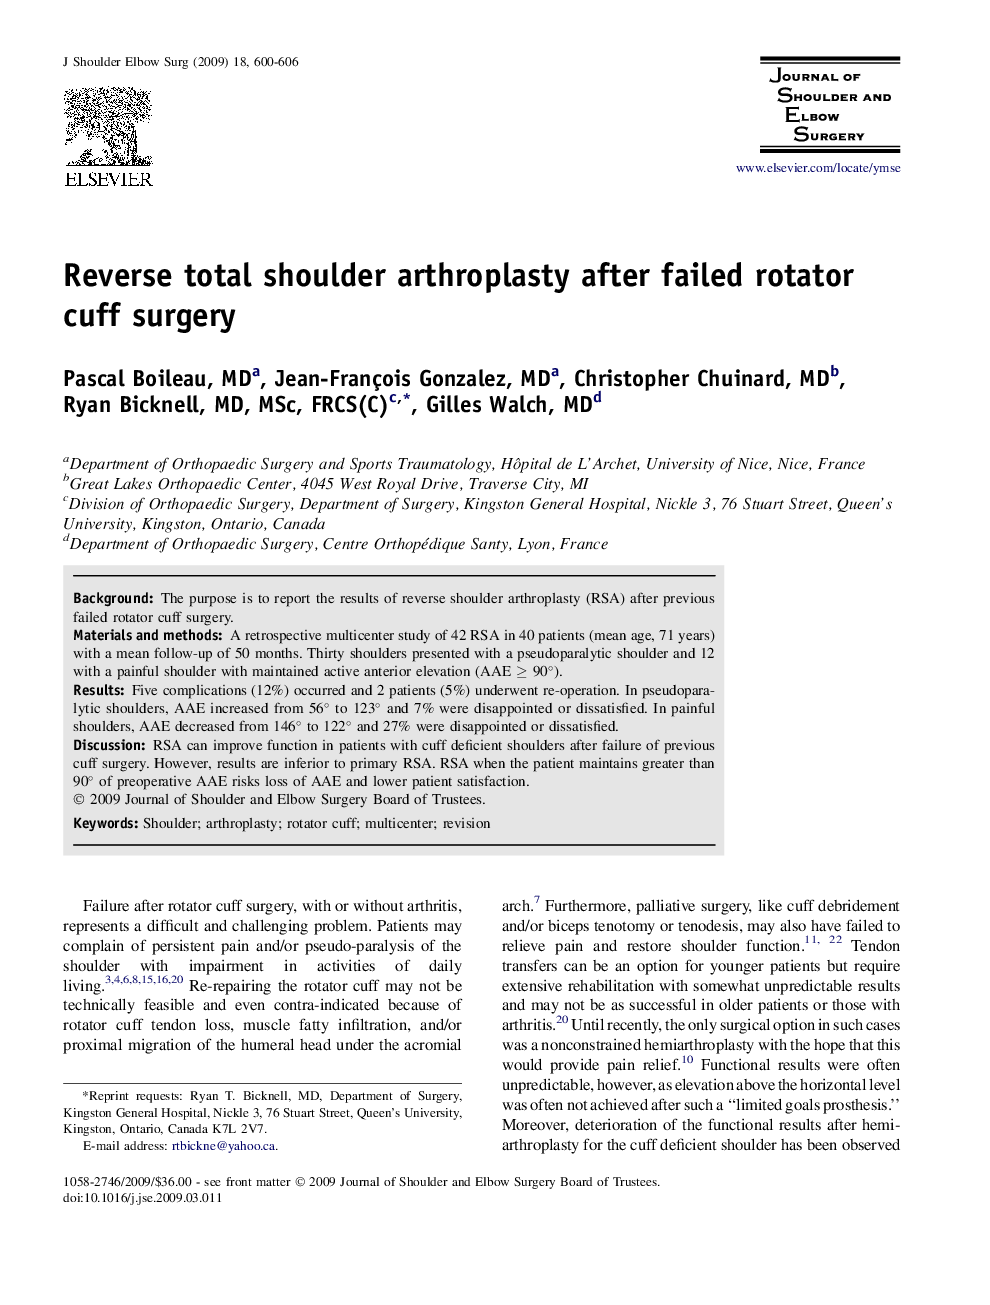 Reverse total shoulder arthroplasty after failed rotator cuff surgery